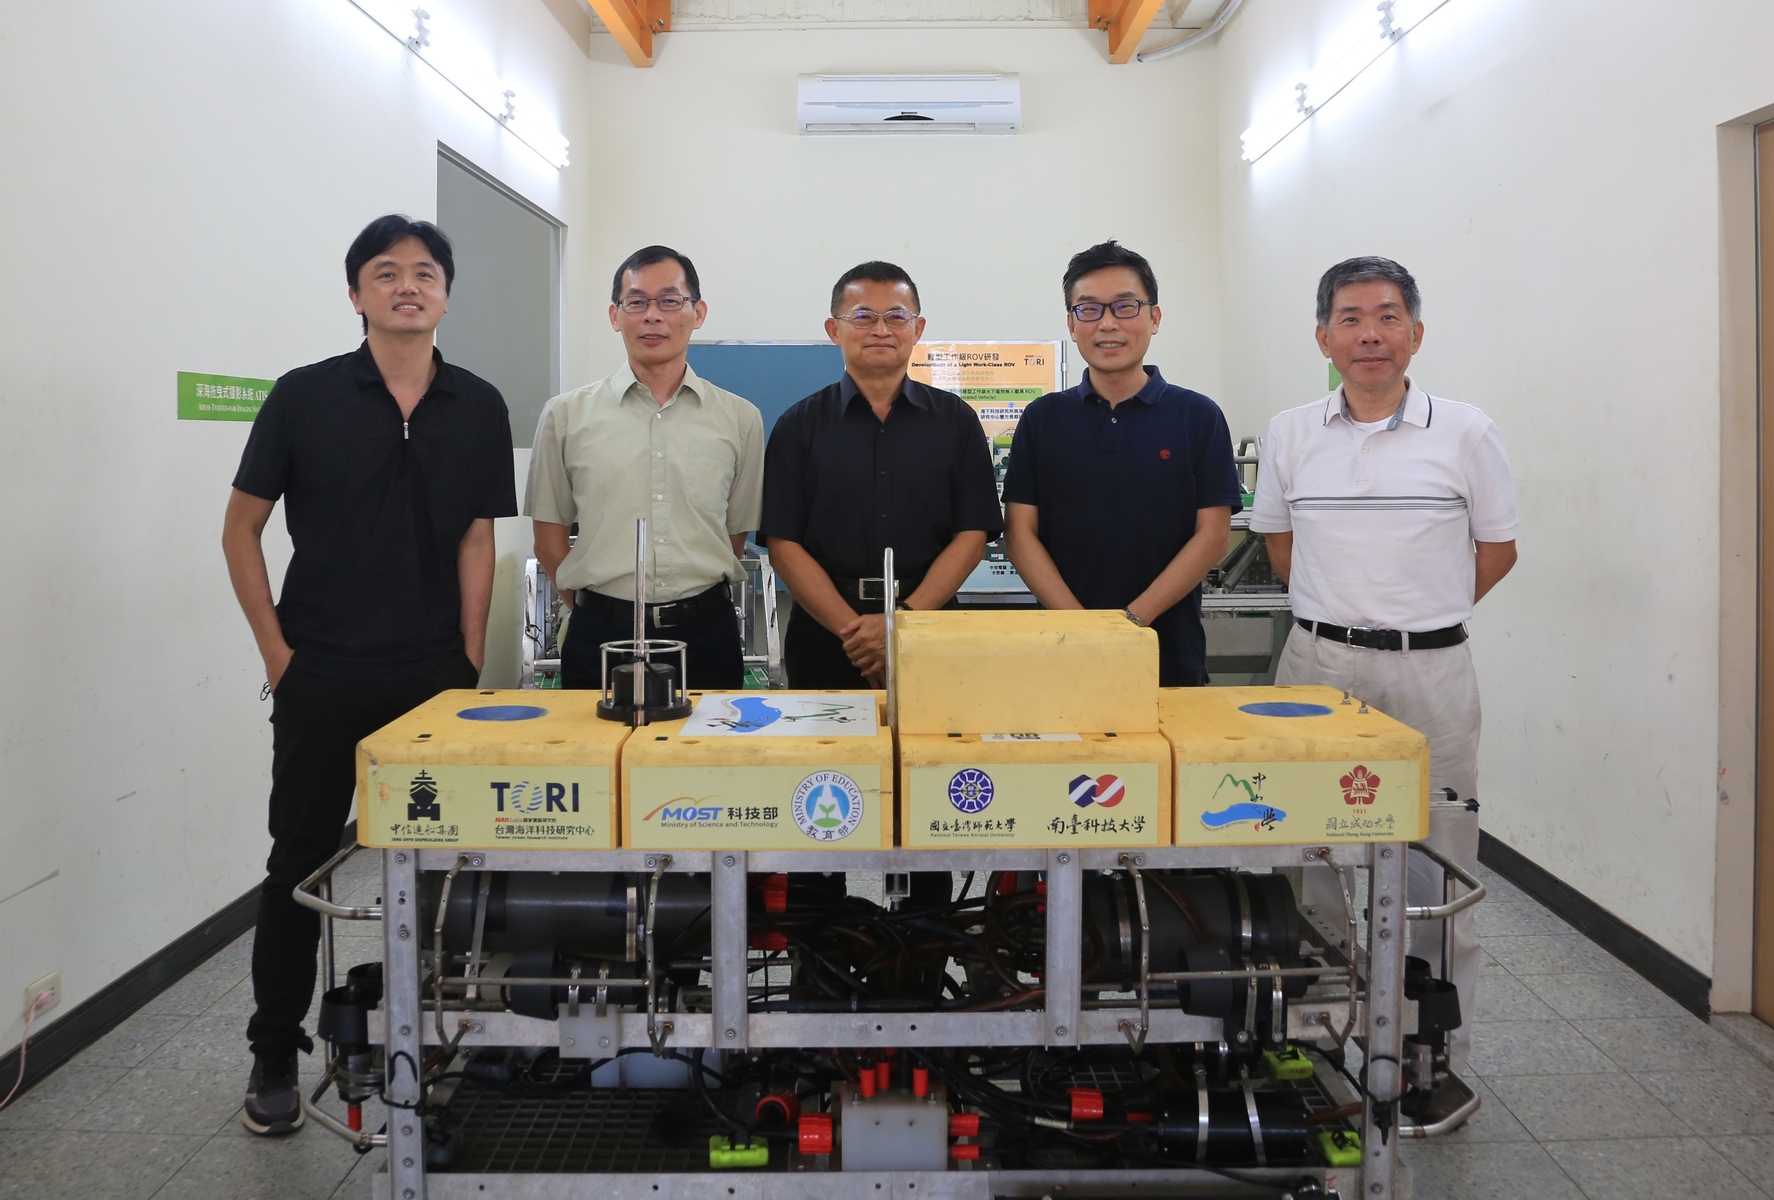 NSYSU team implemented the Key Technology Development for Autonomous Underwater Vehicle with Artificial Intelligence project, which is a key project of the National Science and Technology Council’s Semiconductor Moonshot Project. The AUV applied AI and Deep Learning technology along with information and communications techniques, semiconductors, and embedded systems, launching the first made-in-Taiwan marine-specific AUV. (From the left of the photo) Linus Yung-Sheng Chiu, the Associate Professor of the Institute of Undersea Technology (IUT) at NSYSU, Hsin-Hung Chen, Director and Professor of IUT, Chua-Chin Wang, Professor of the Department of Electrical Engineering and Vice President for Research and Development at NSYSU, Yu-Cheng Chou, the Associate Professor of IUT, and Chau-Chang Wang, the Professor of IUT.